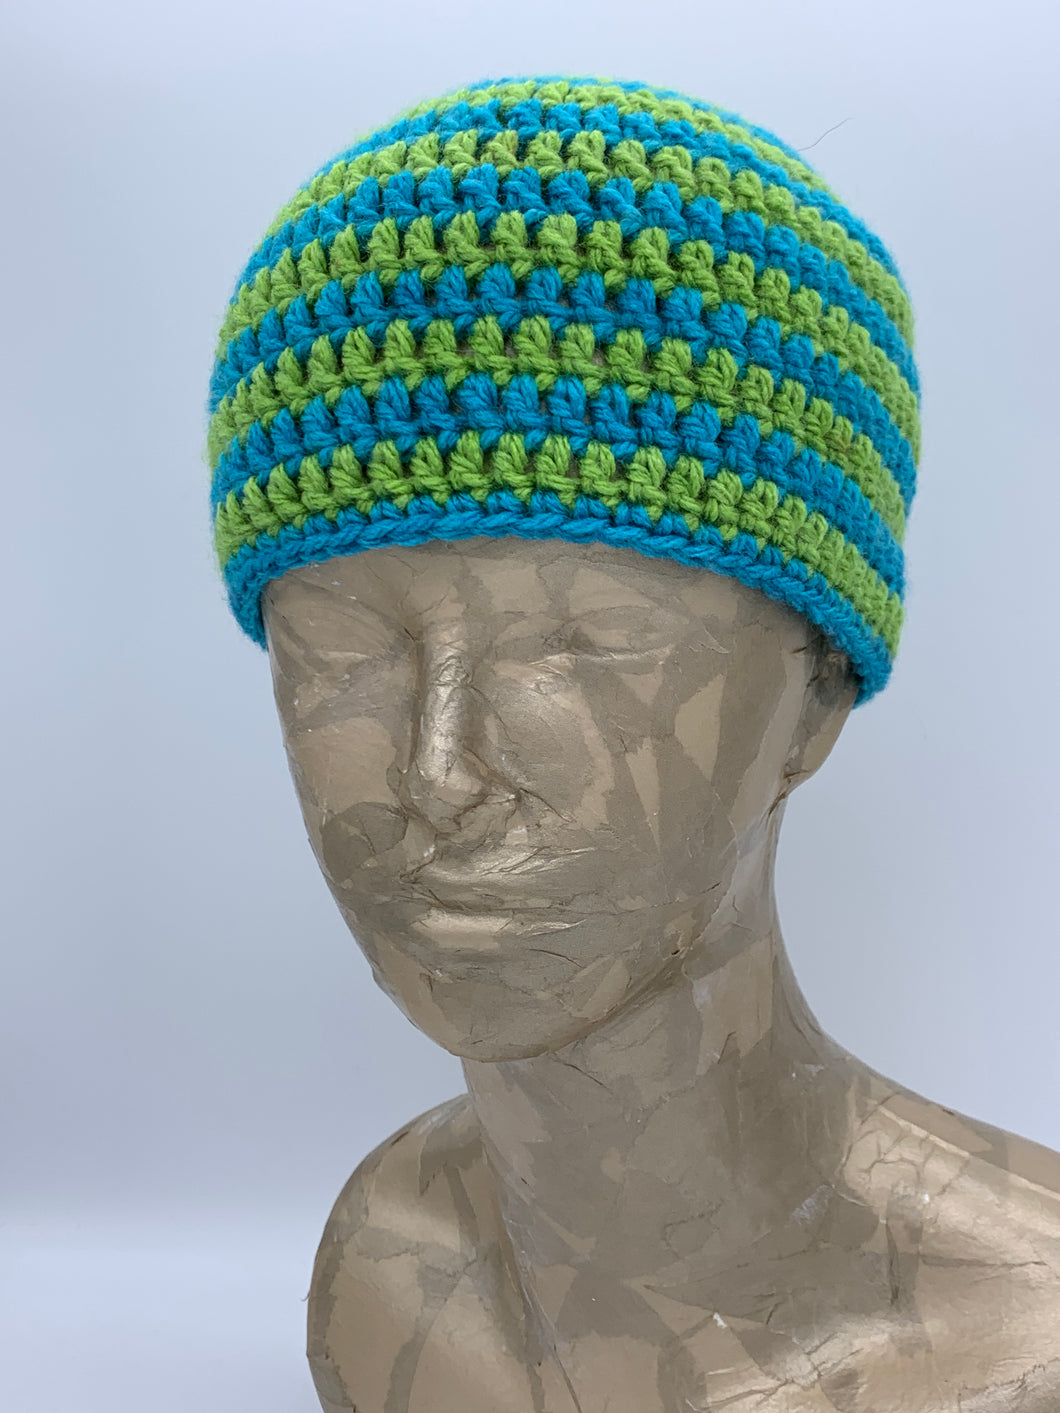 Crochet striped turquoise and green beanie hat- Size Toddler 1-3 yrs